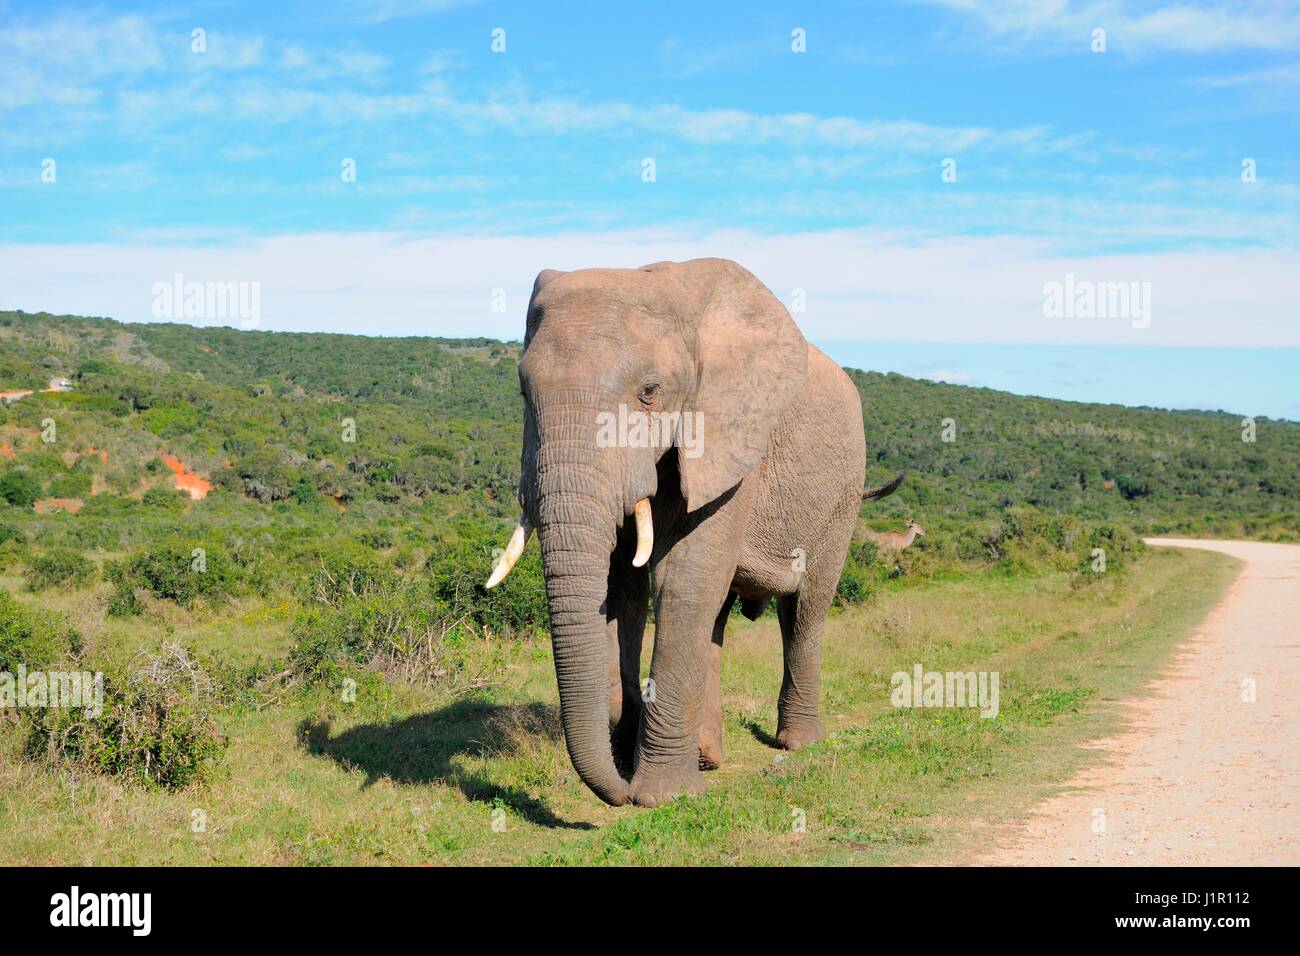 African bush elephant (Loxodonta africana), bull walking on grass along a dirt road, Addo Elephant National Park, Eastern Cape, South Africa, Africa Stock Photo